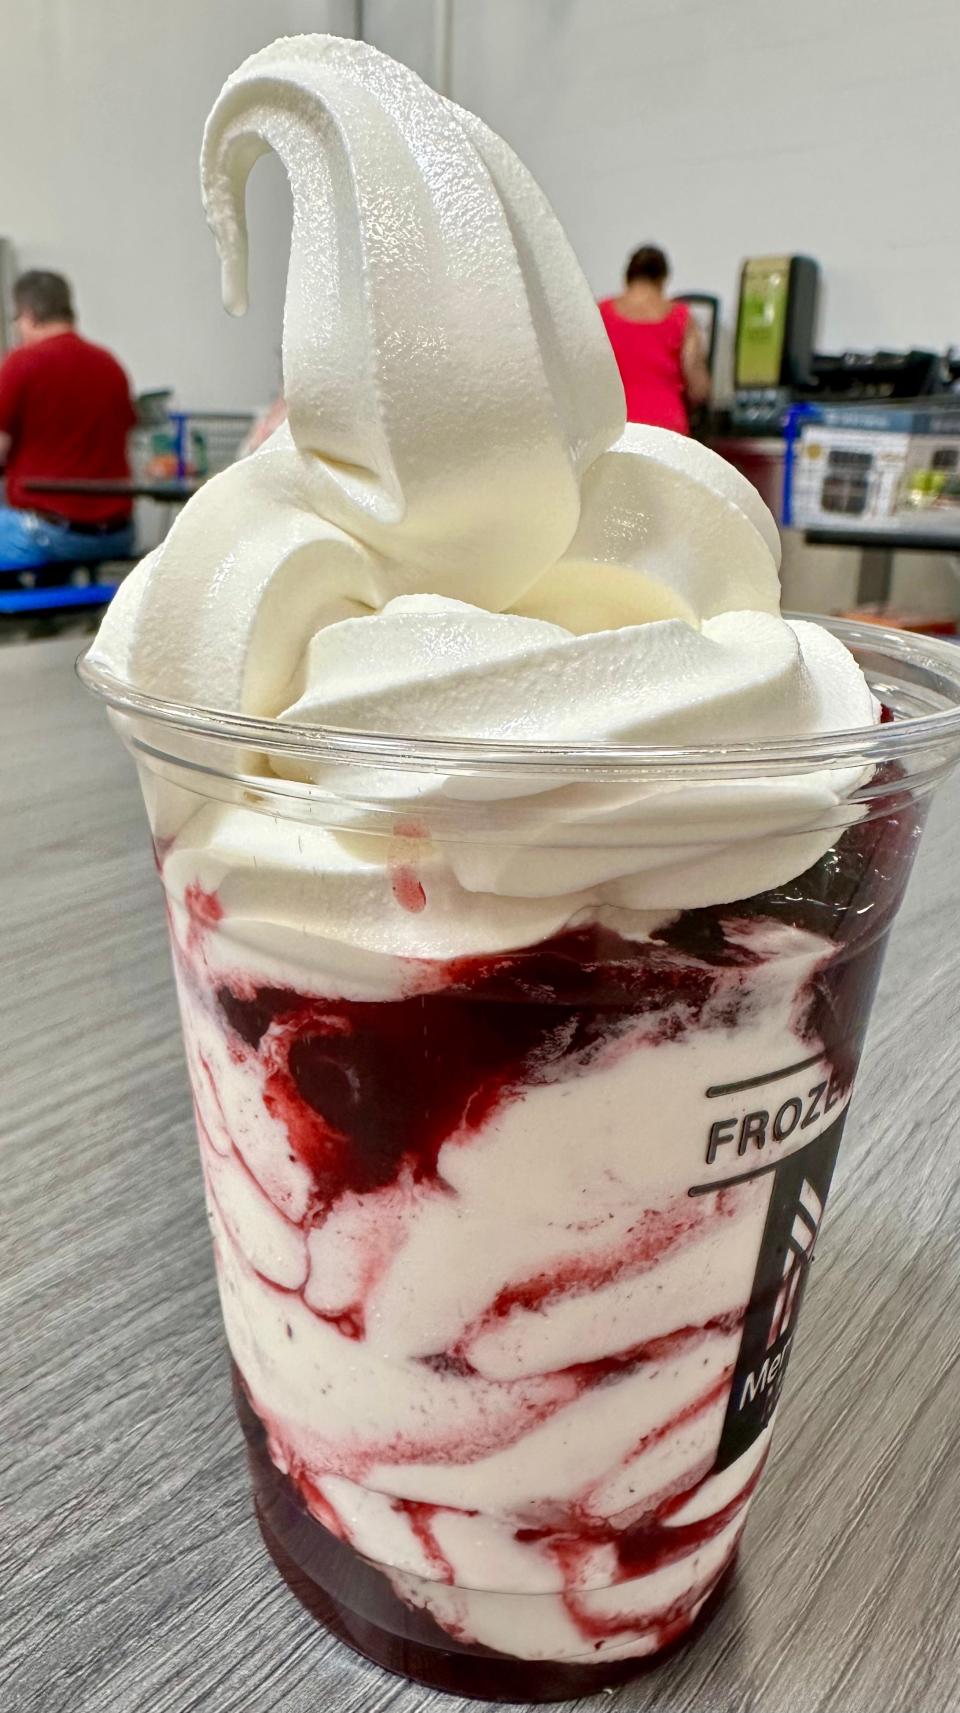 Both the brownie and berry sundaes at the Sam's Club food court are made with frozen yogurt, not ice cream.